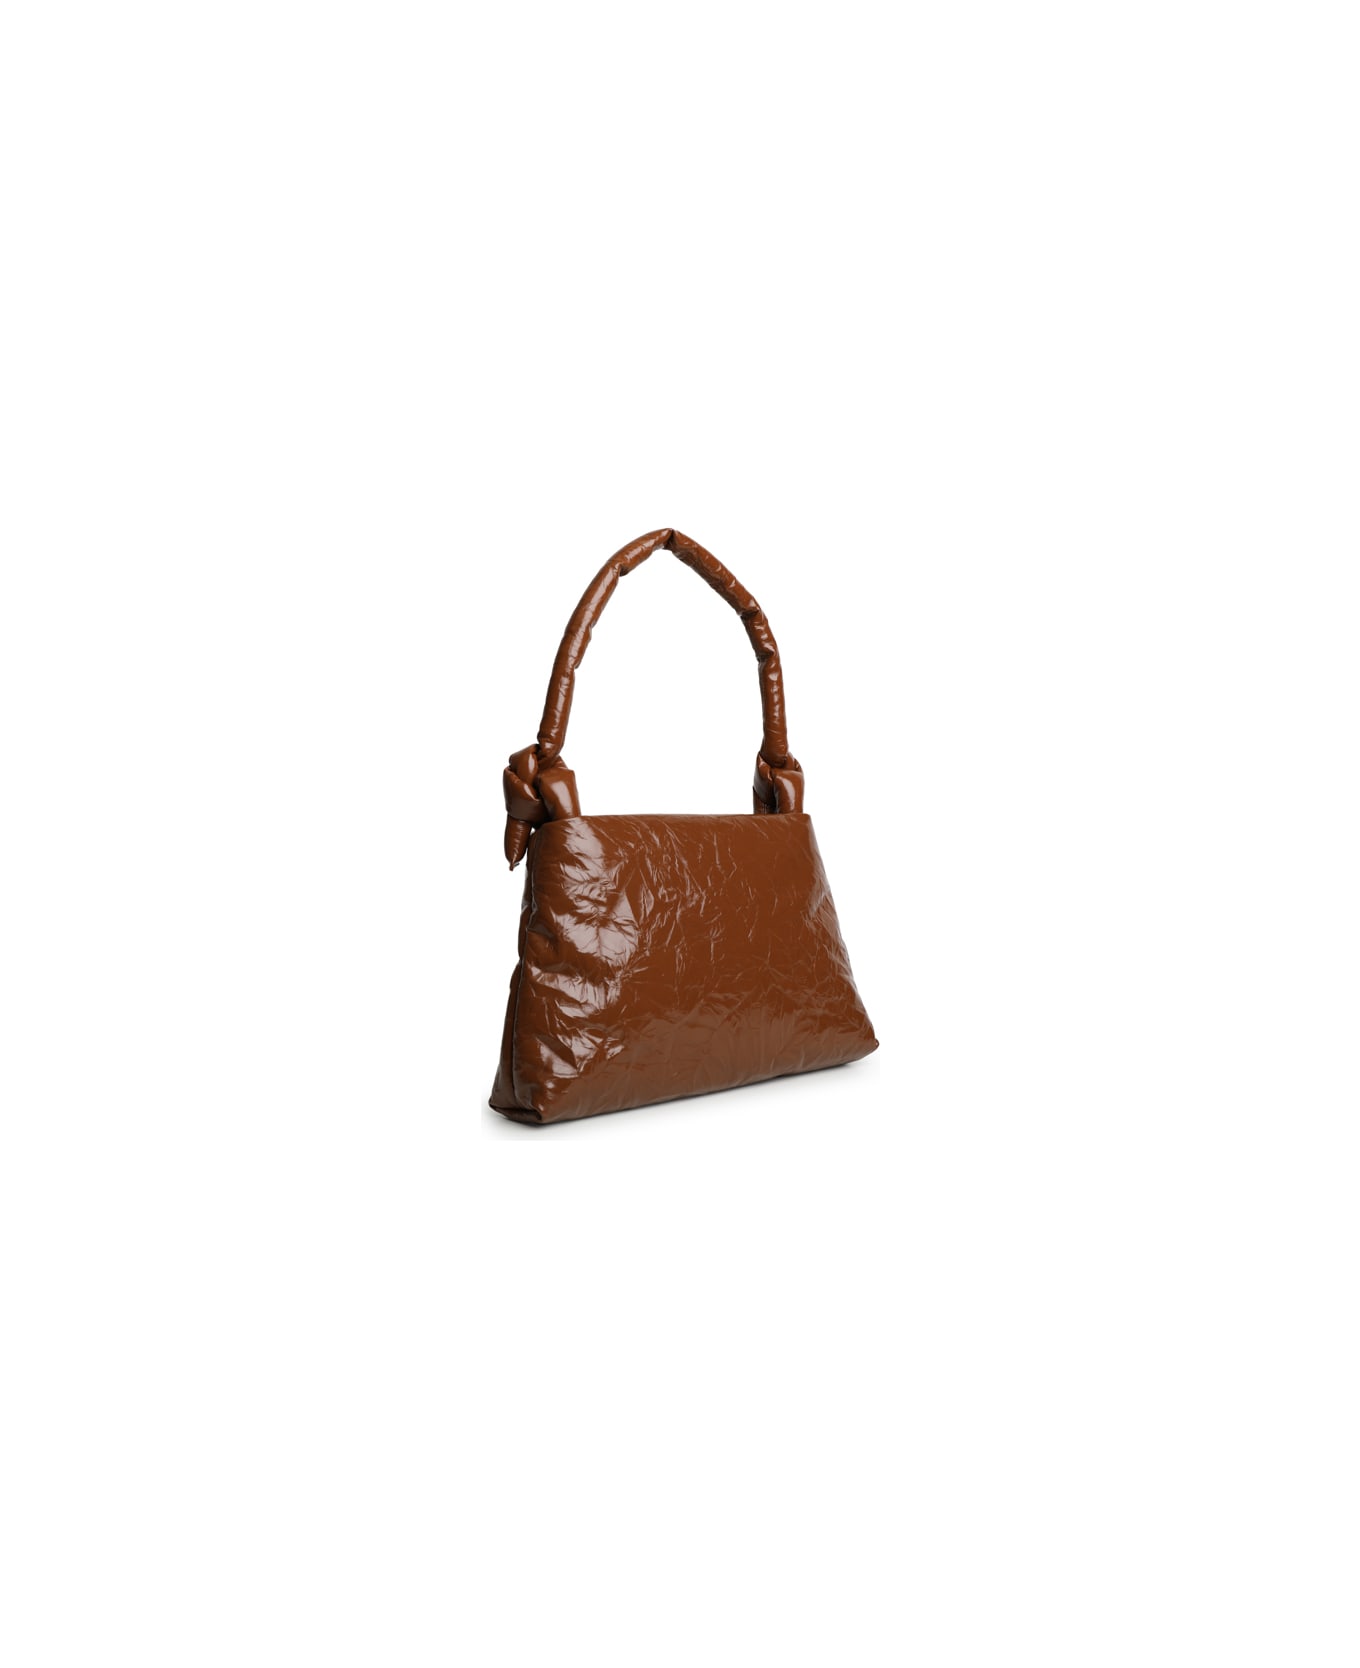 KASSL Editions Lady Bag With Side Knots - Cognac